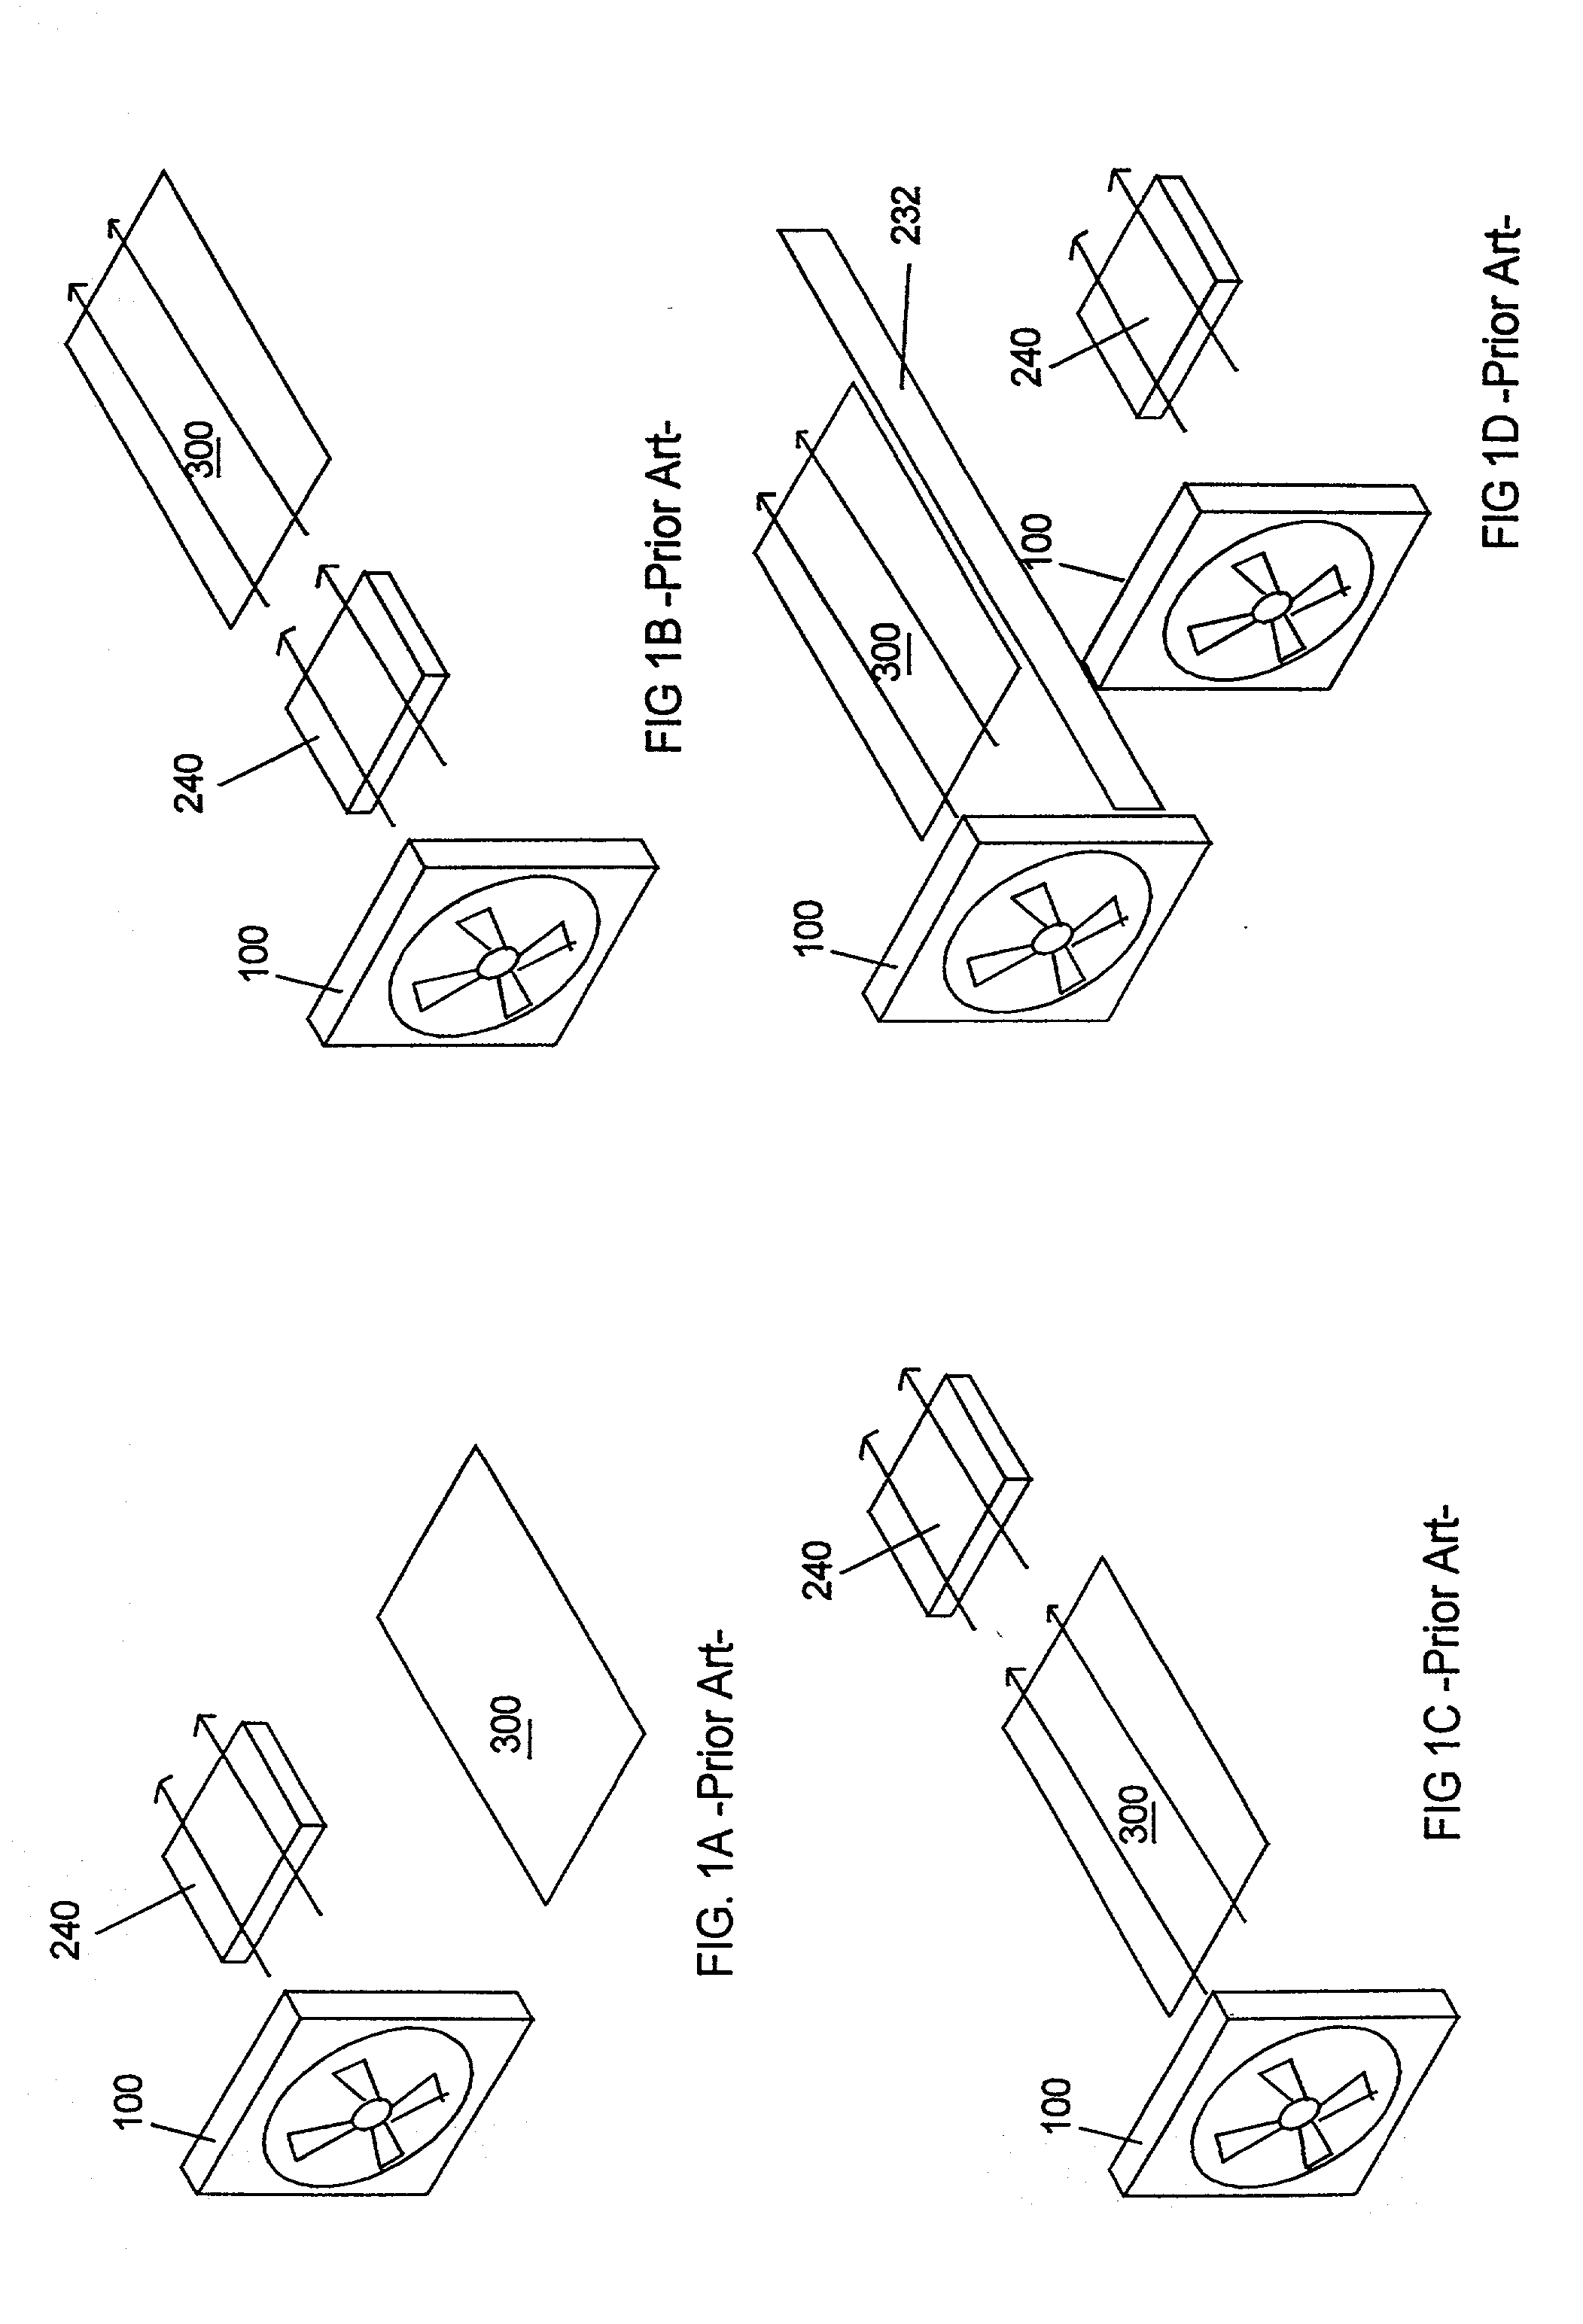 Apparatus to enhance cooling of electronic device